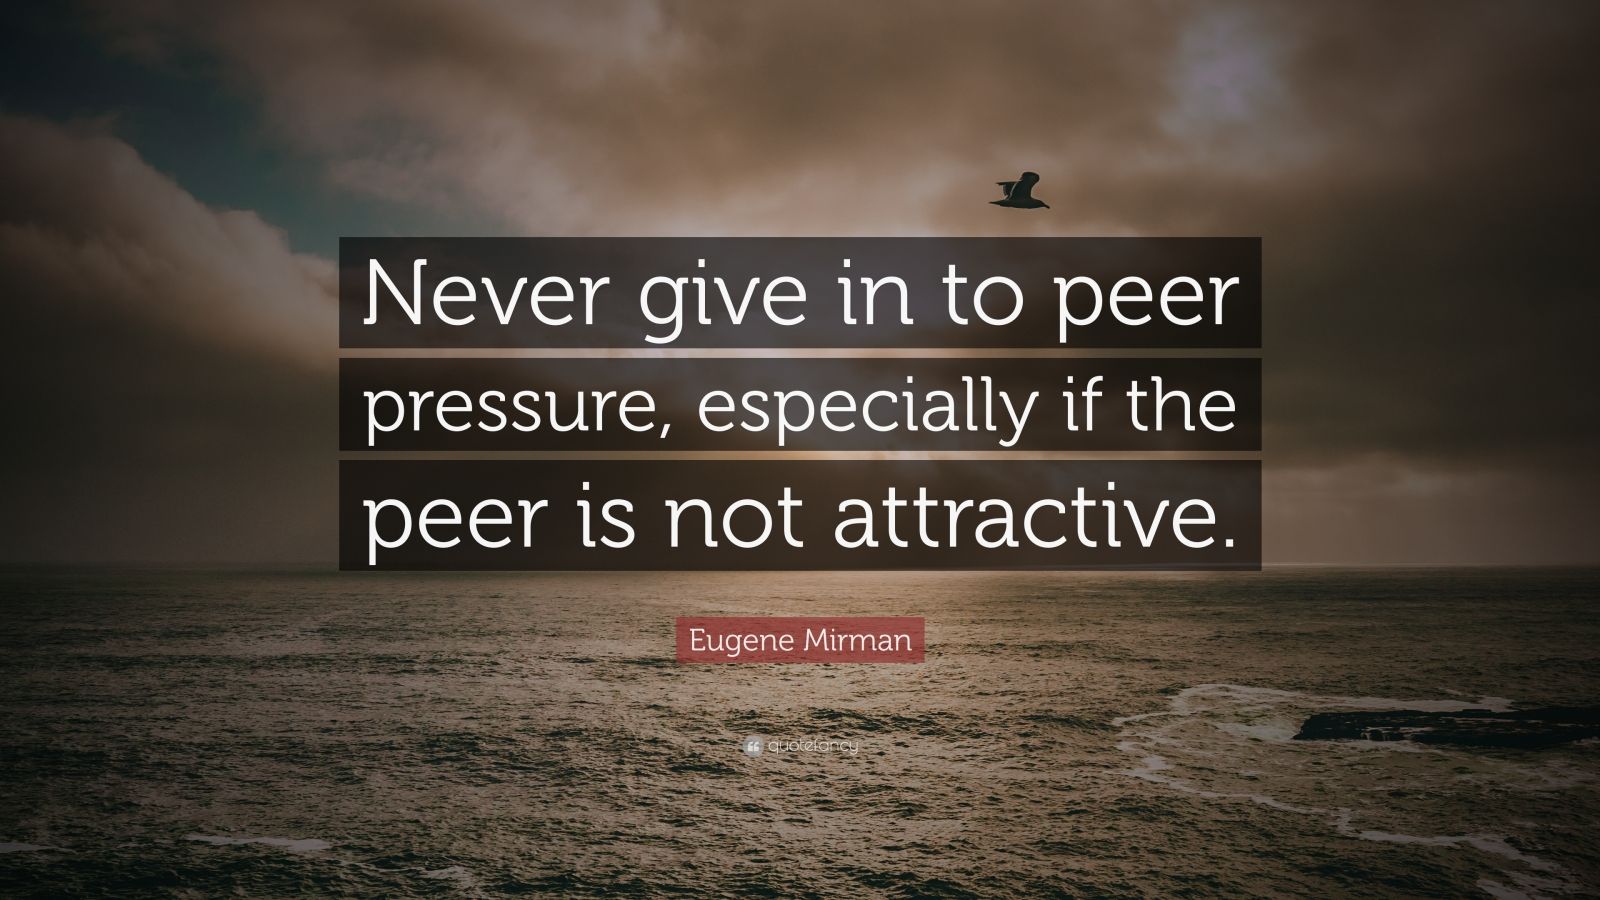 Eugene Mirman Quote “never Give In To Peer Pressure Especially If The Peer Is Not Attractive 1543